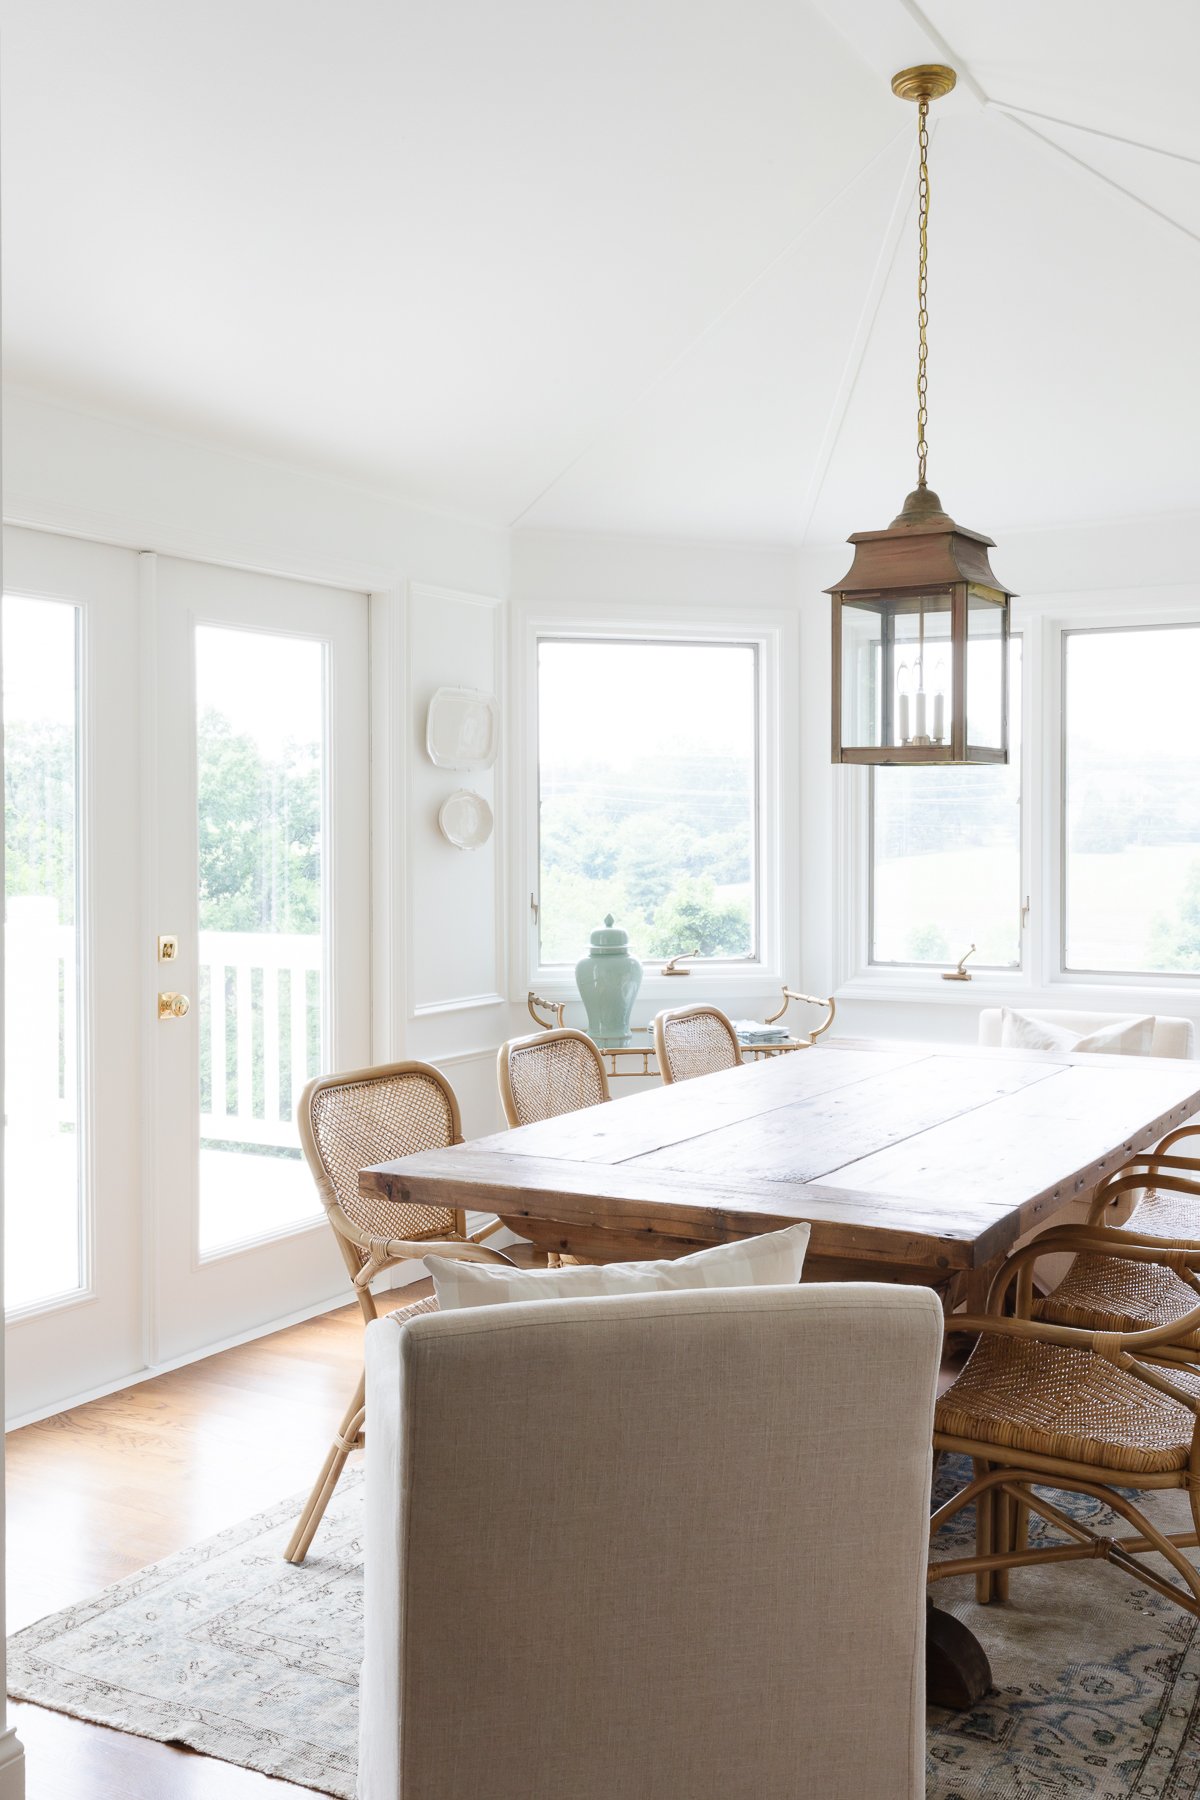 A white dining room with a wood farm table, rattan chairs, brass lantern and plates on the wall.